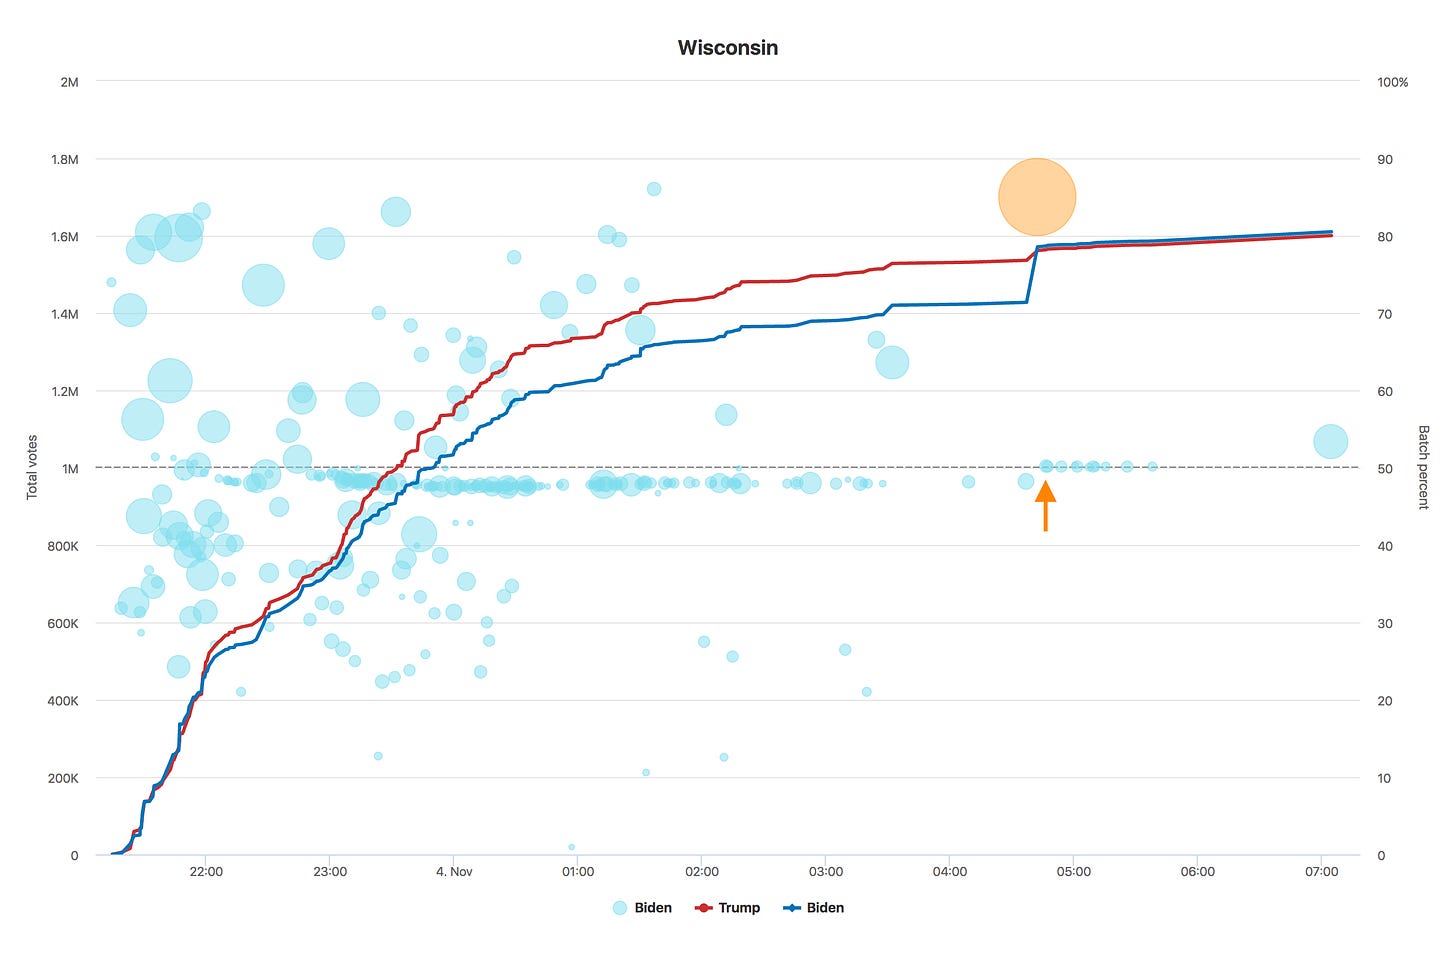 Chart of Wisconsin voting data over time